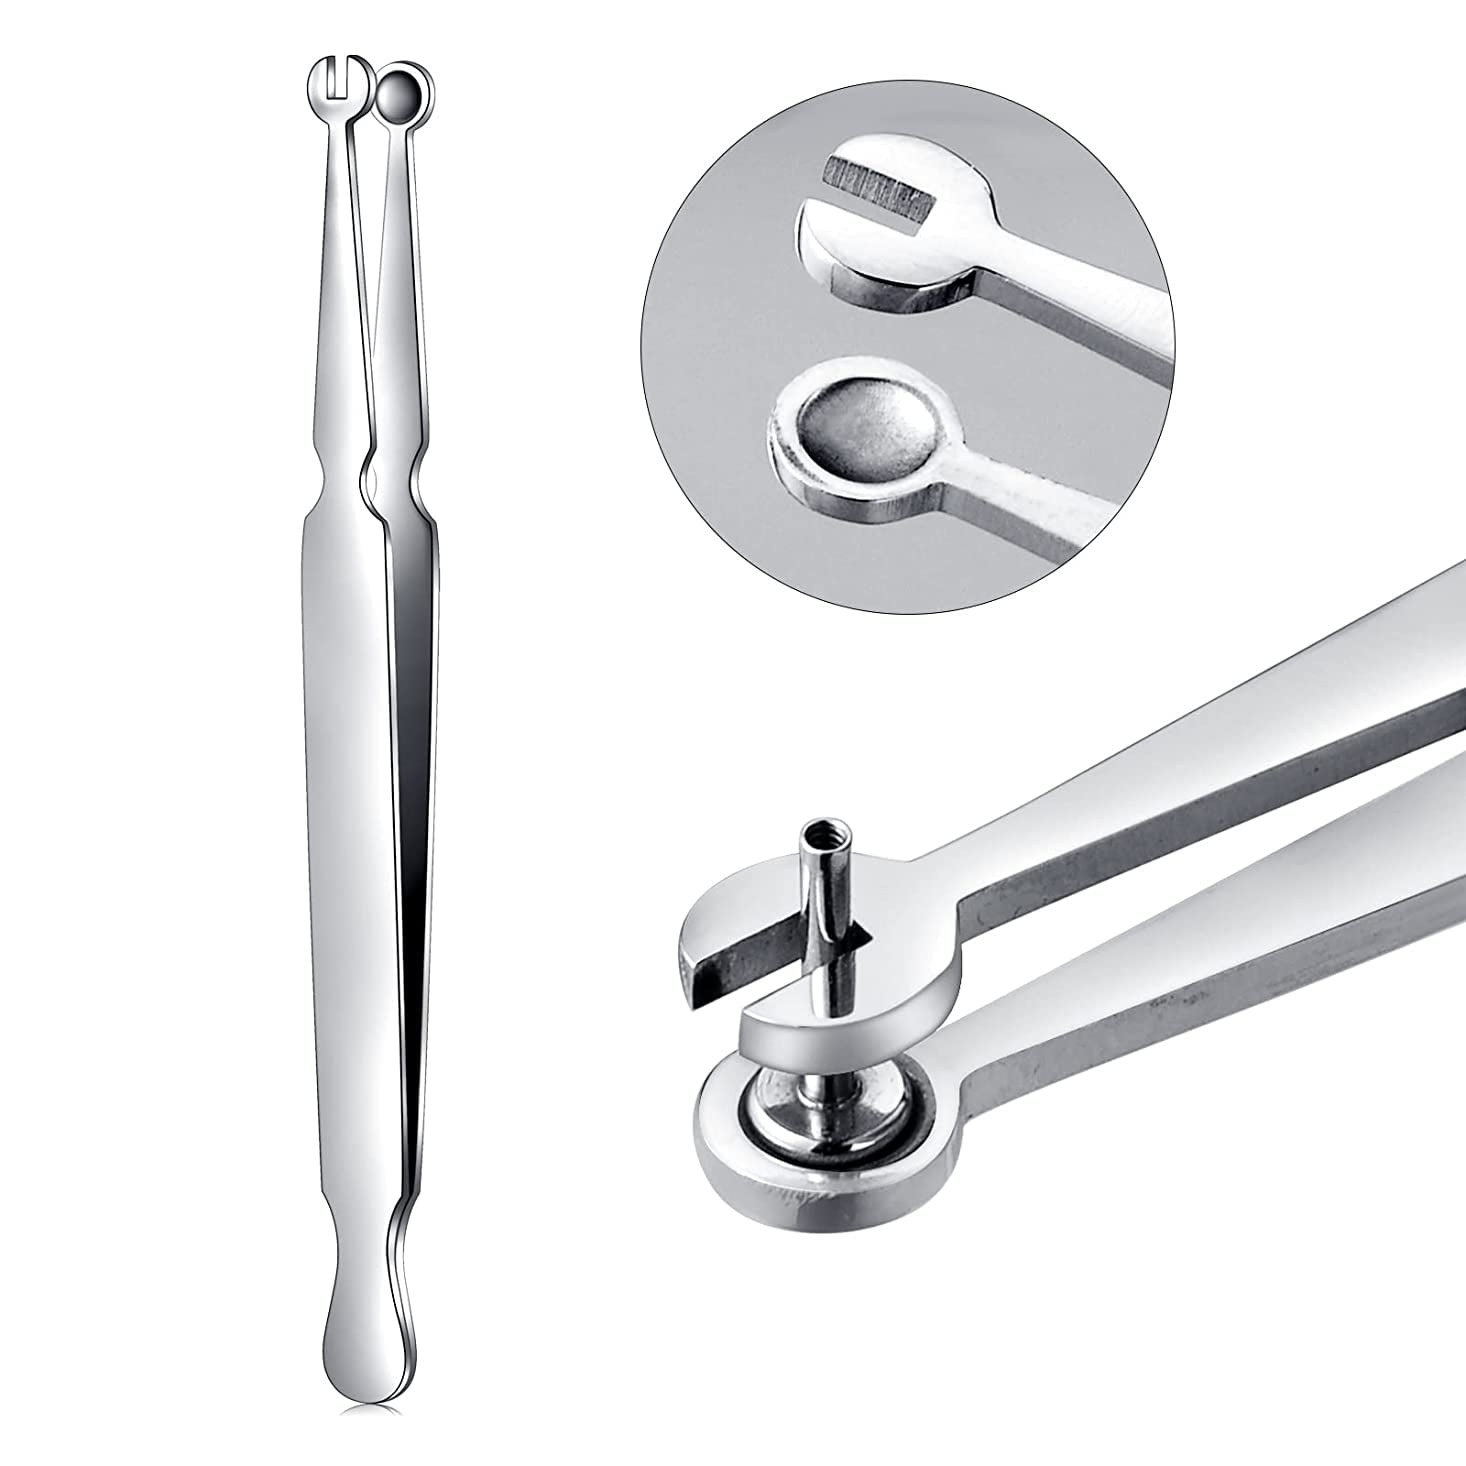 Ball Grabeer Body Piercing Surgical Jewelry Tools